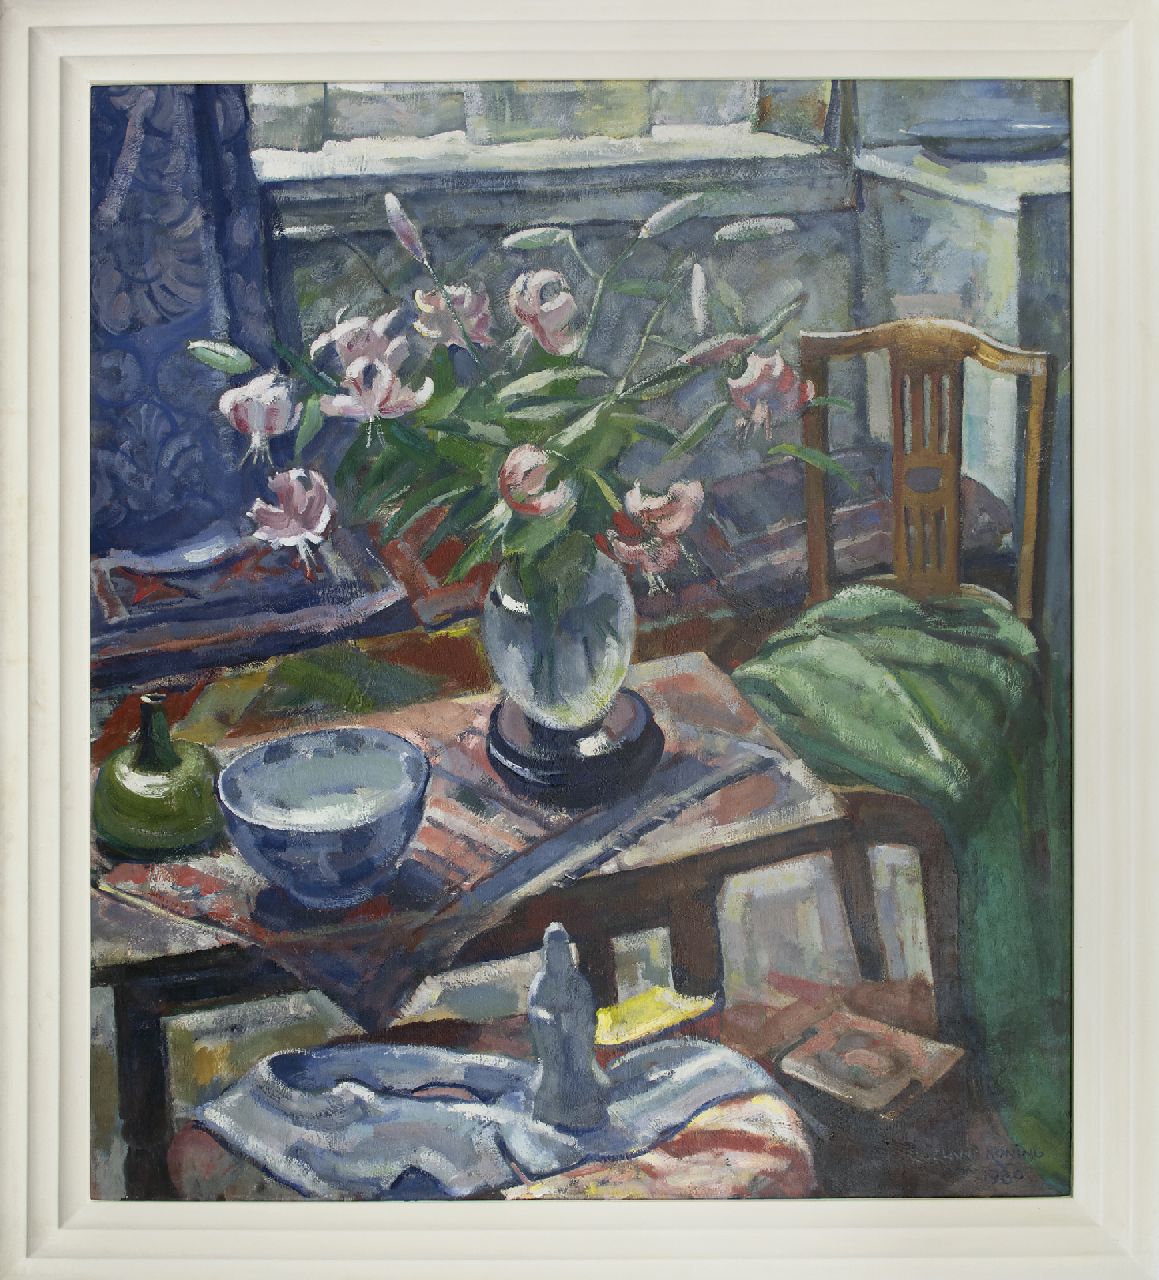 Koning R.  | Roeland Koning, Lilies in a vase on a coffee table, oil on canvas 161.3 x 139.7 cm, signed l.r. and dated 1980